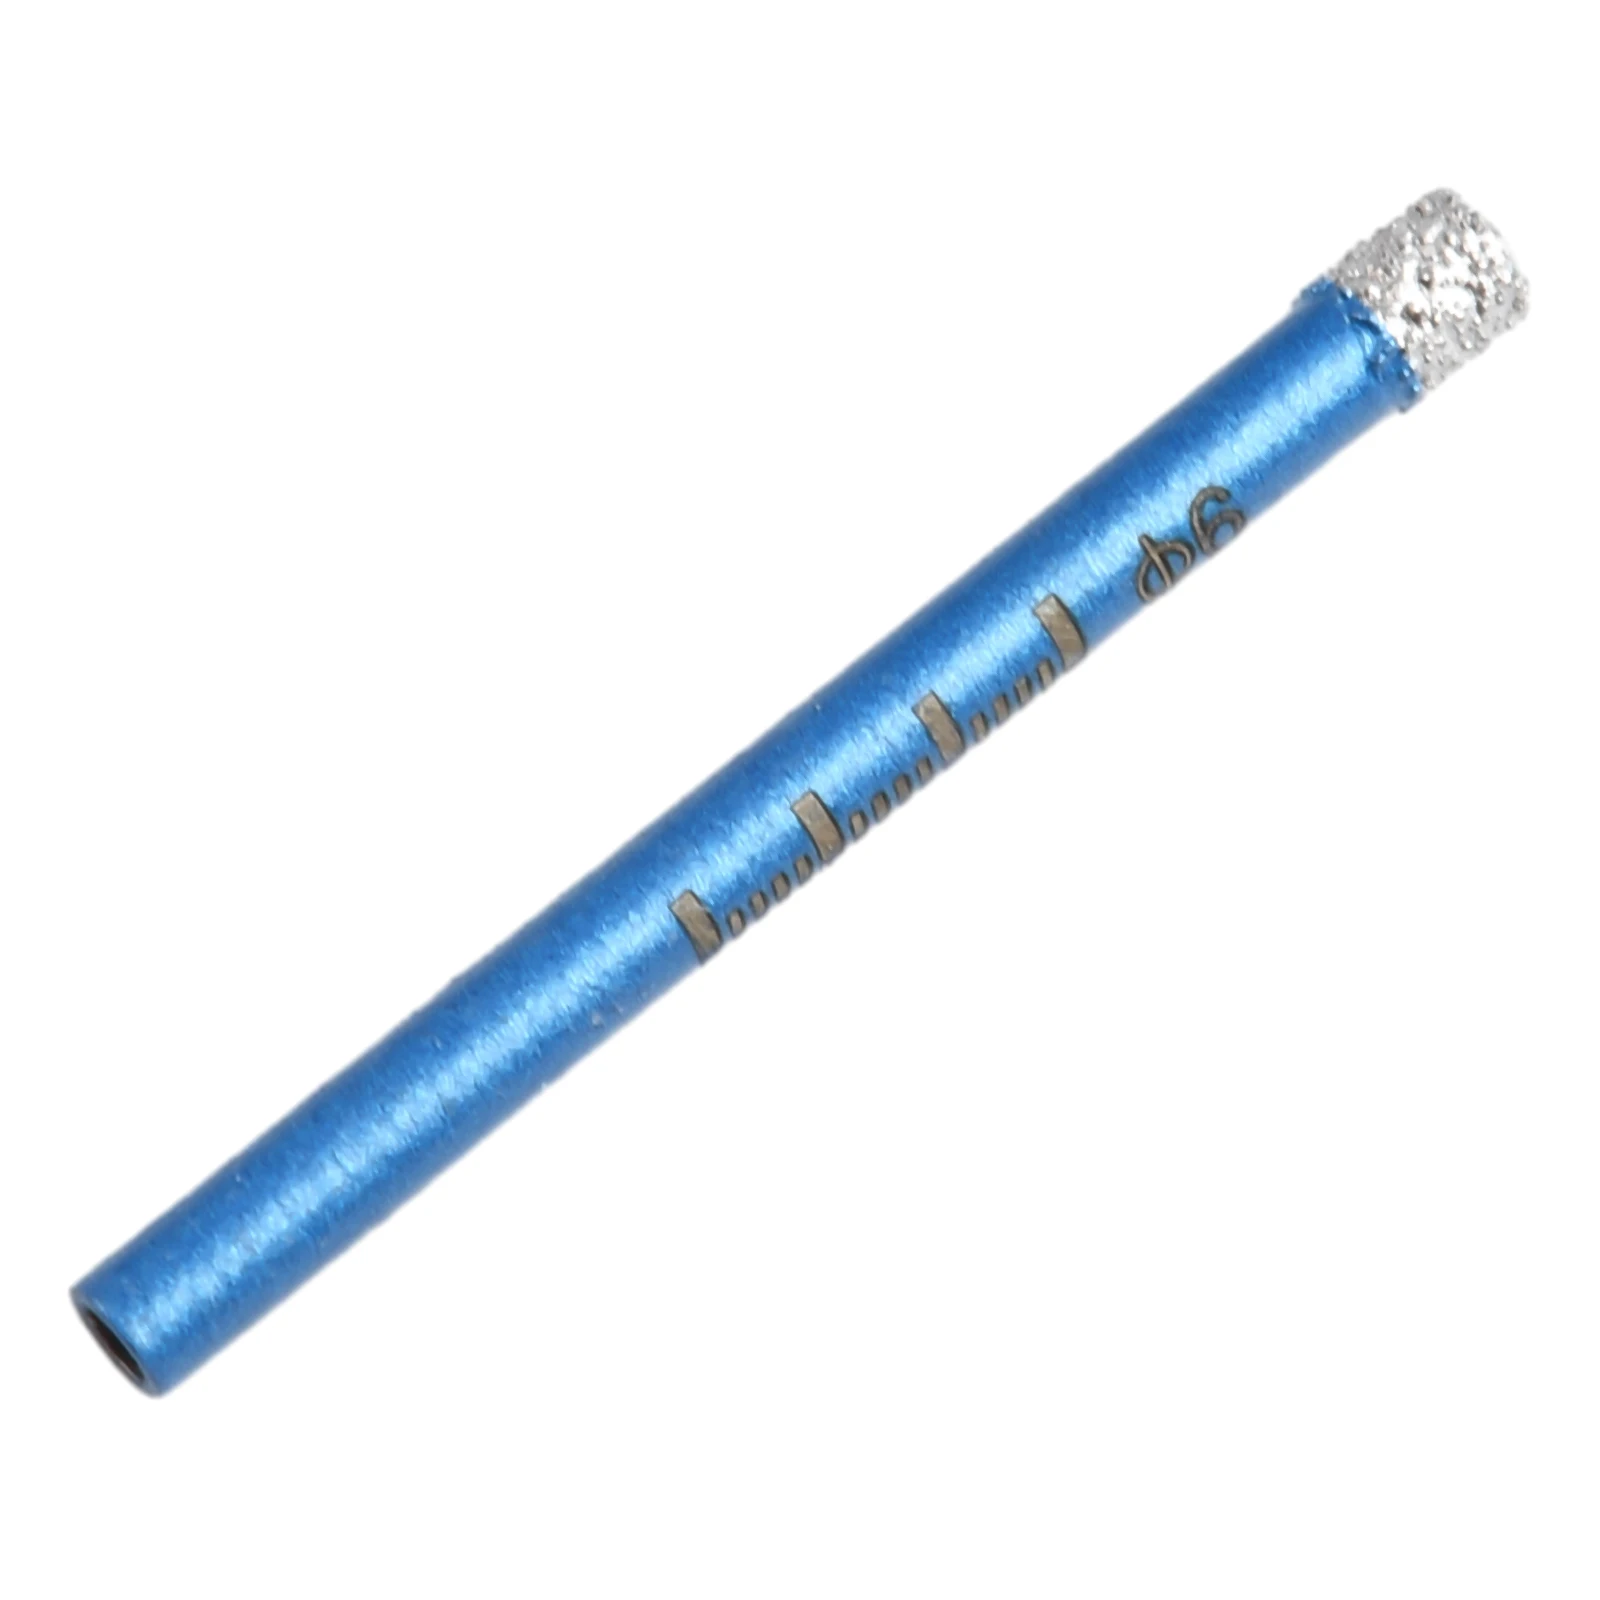 

For Drill Chuck Drill Bit Diamond For Drilling 1pc W/ Cooling Wax Ceramic Concrete Glass High Efficiency Marble